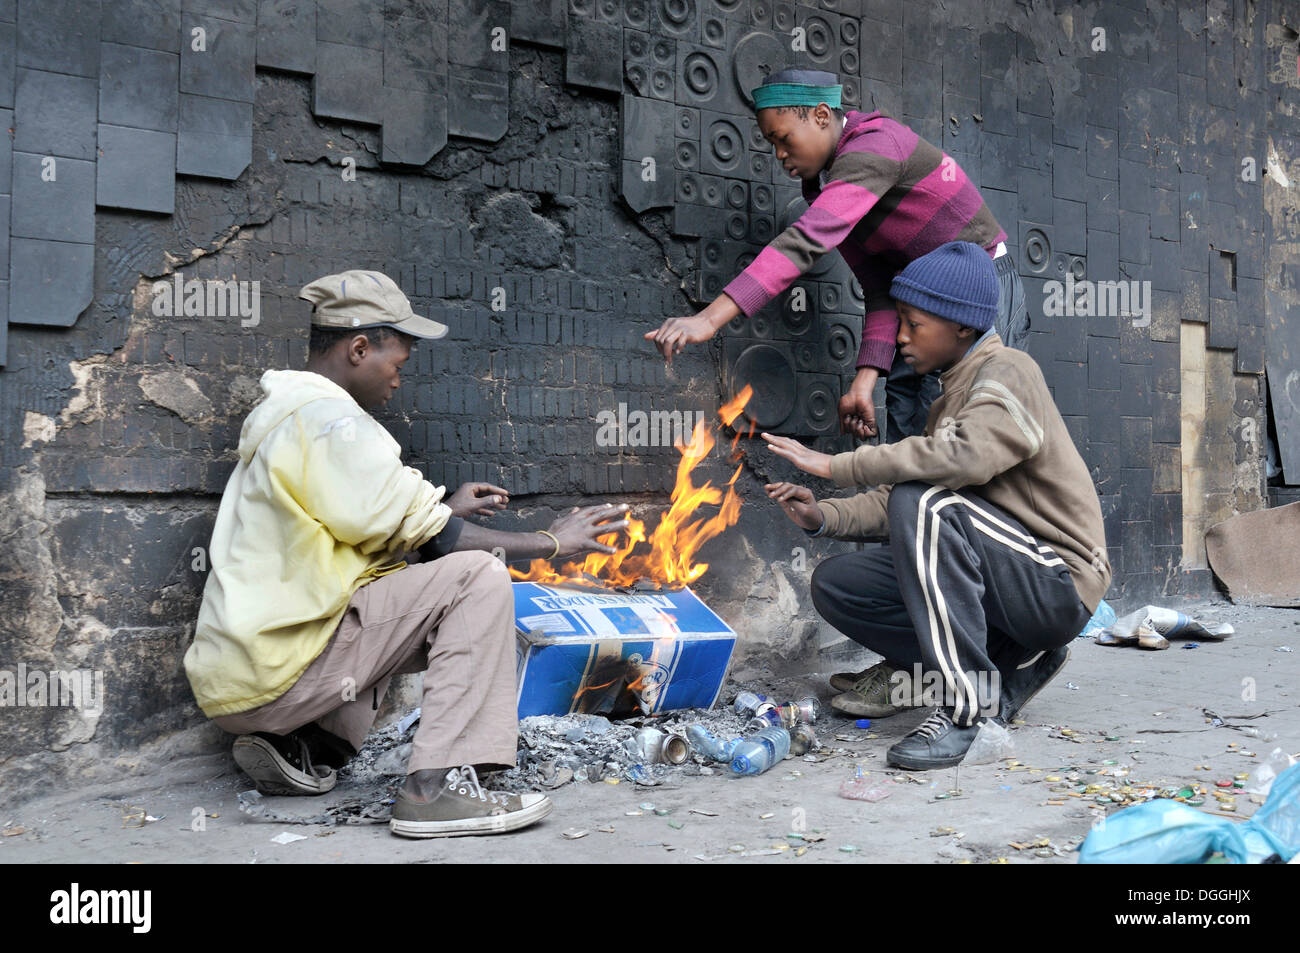 Street children warming themselves around a fire in the early morning, Hillbrow district, Johannesburg, South Africa, Africa Stock Photo